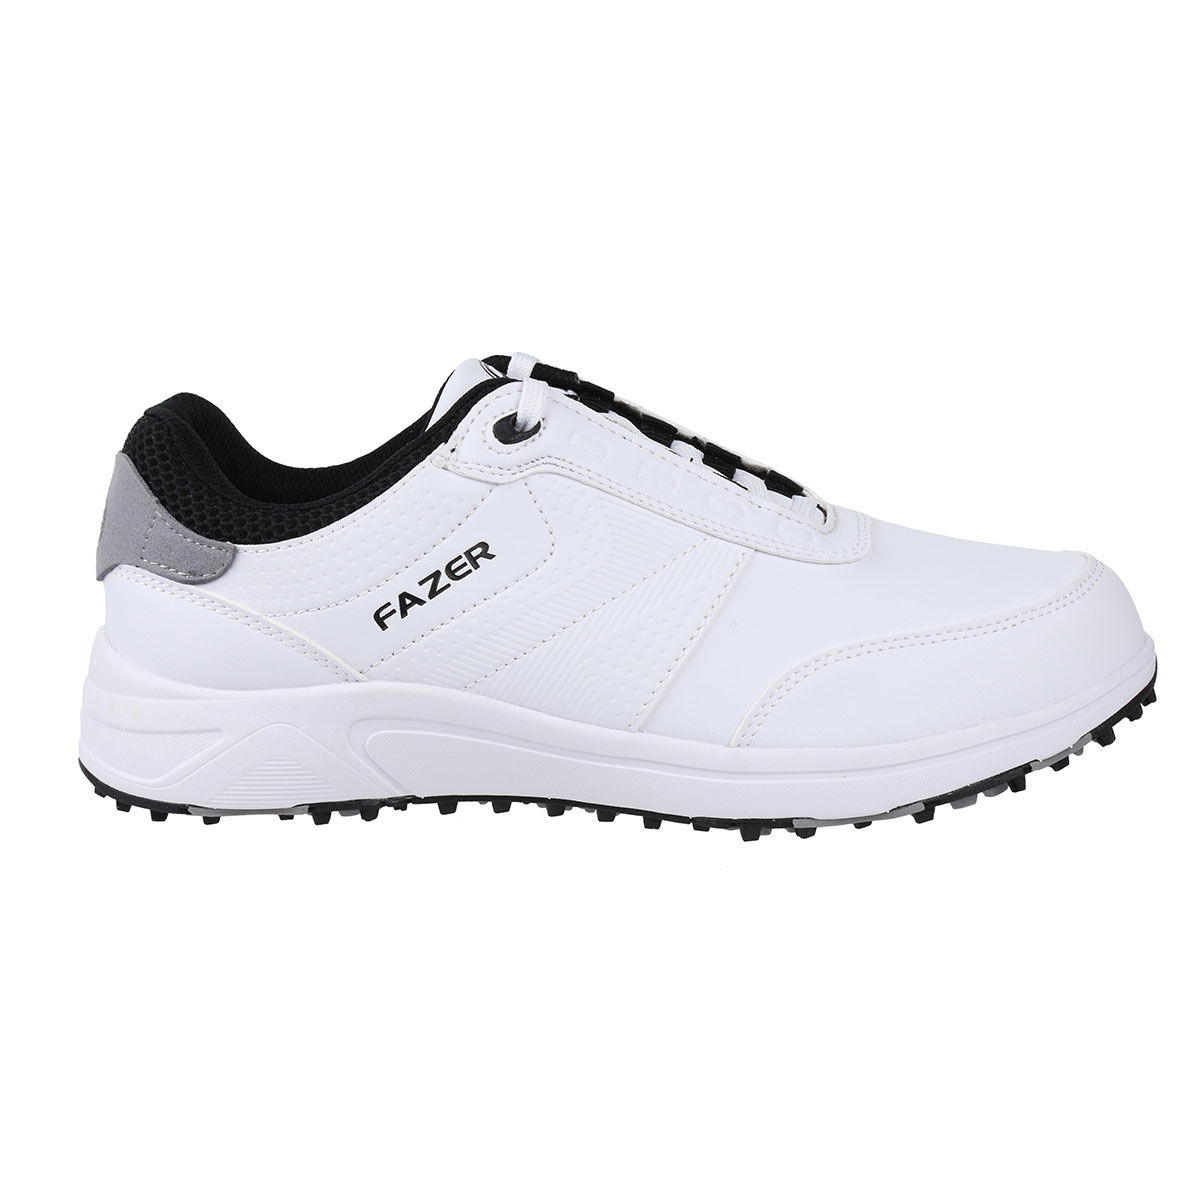 Fazer White and Black Waterproof Men’s Victory Spikeless Golf Shoes, Size: 7 | American Golf